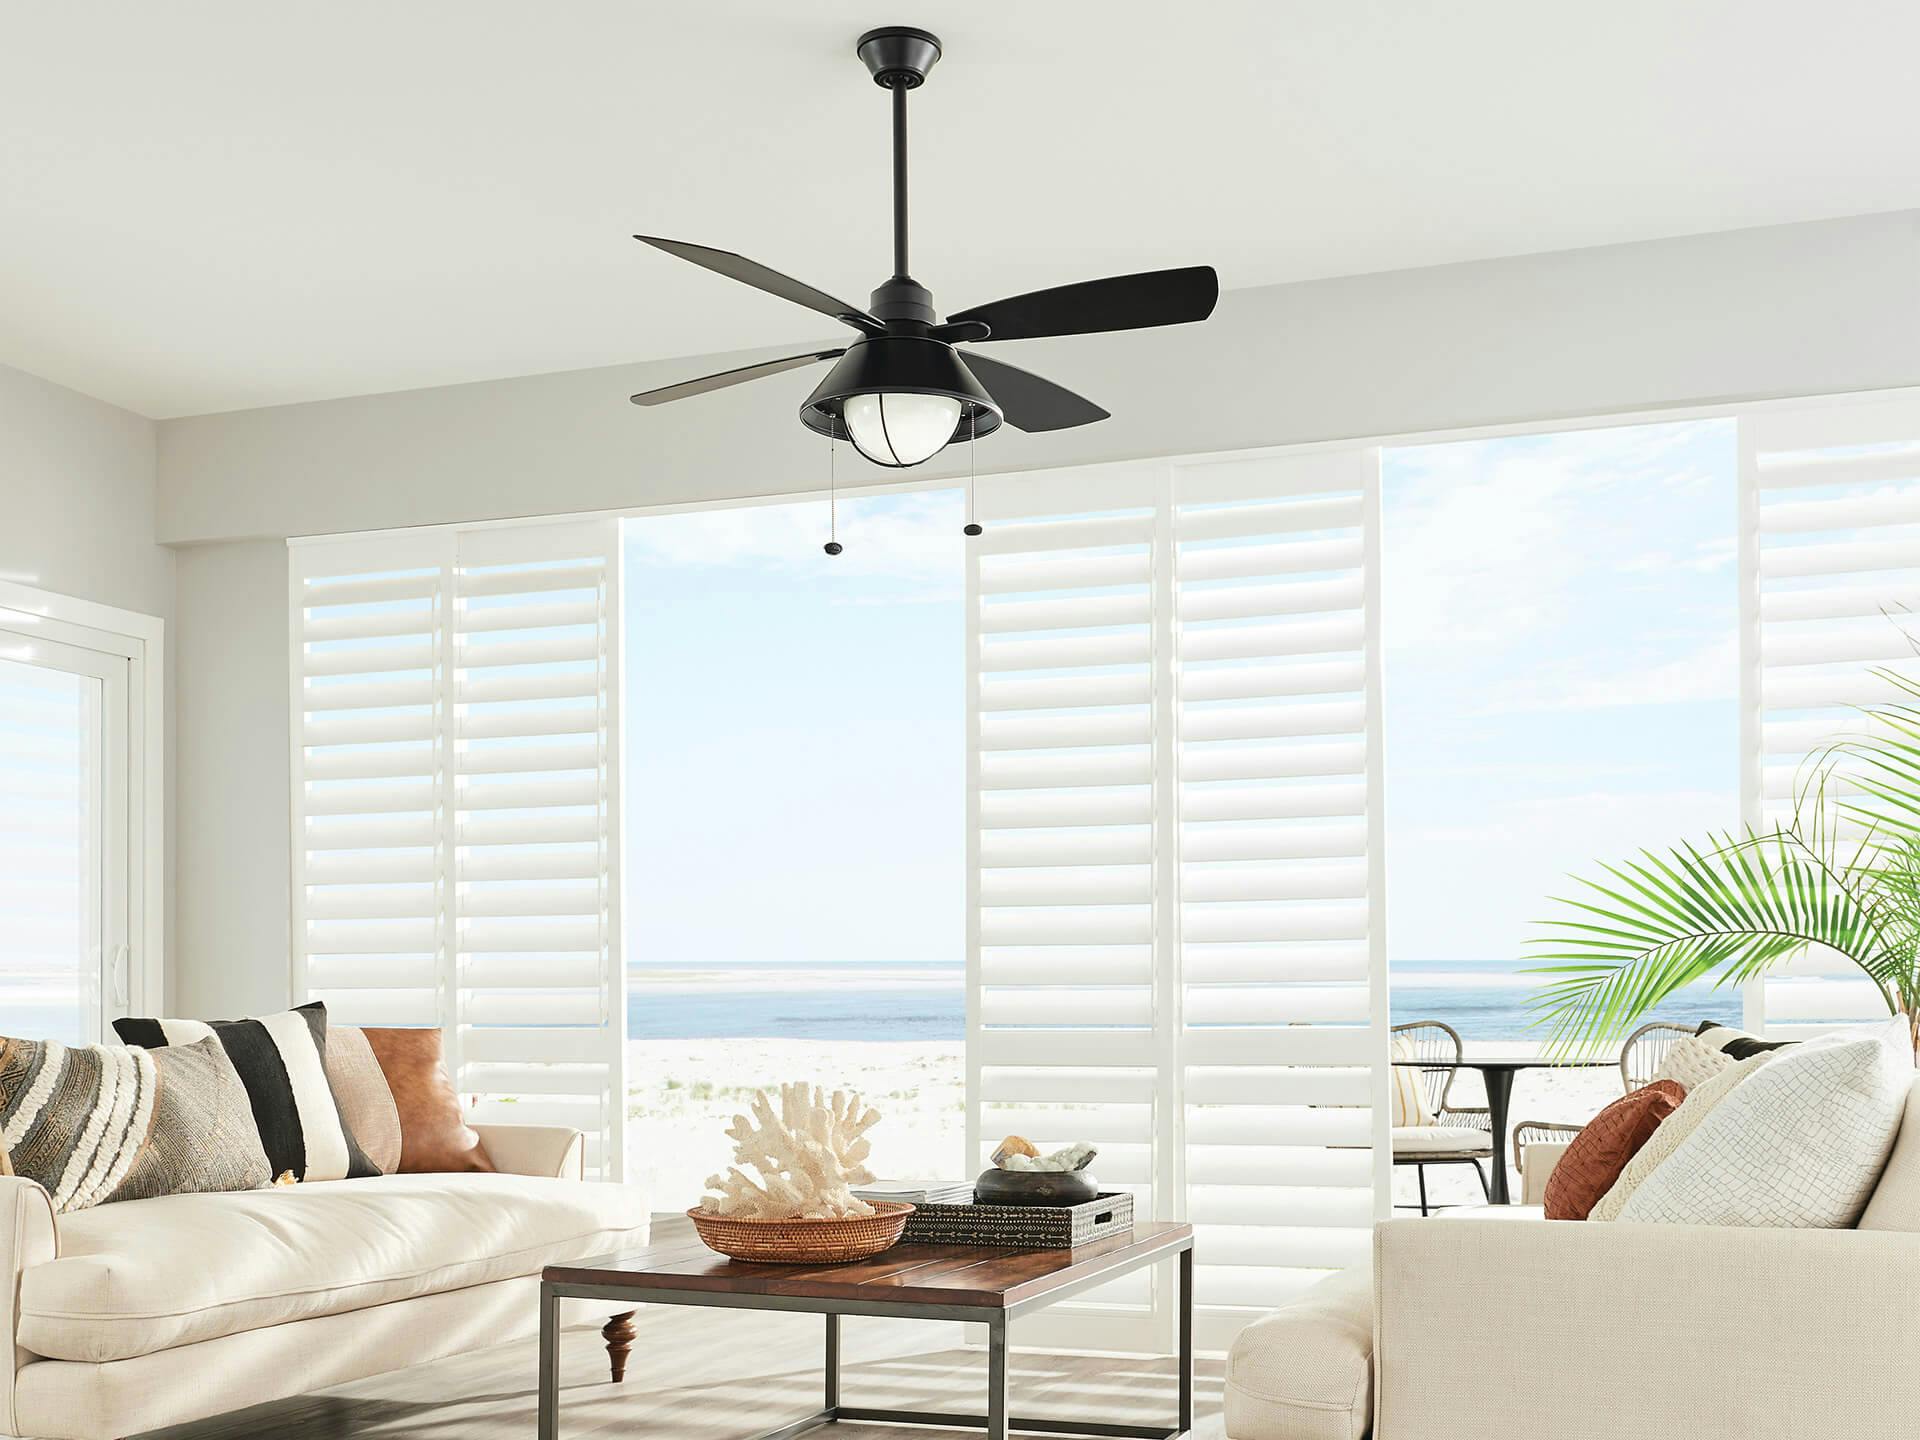 Beachside sunroom with white couches and ceiling fan